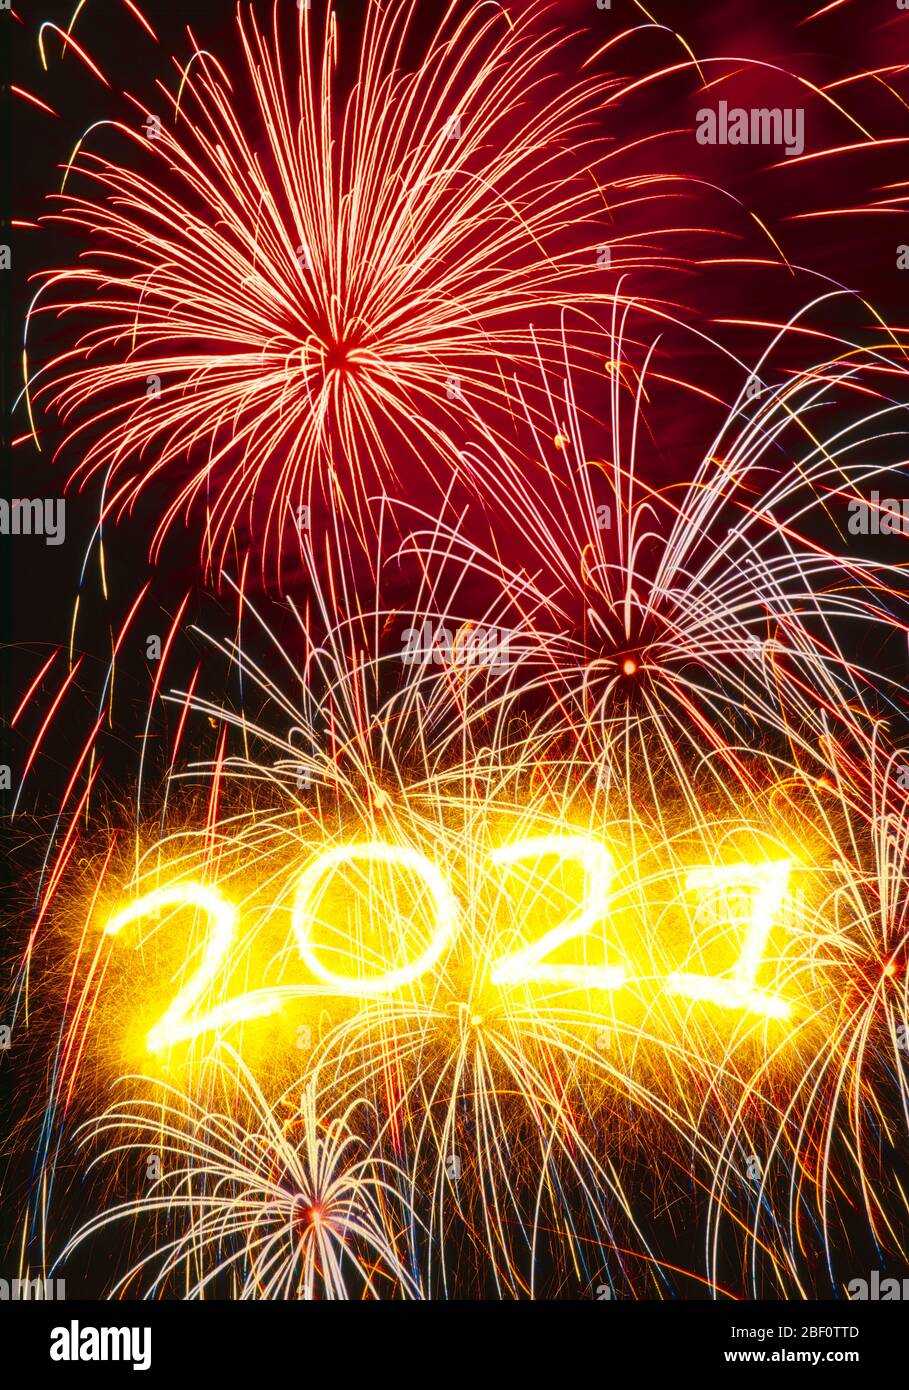 PHOTOMONTAGE, fireworks with year 2021 Stock Photo